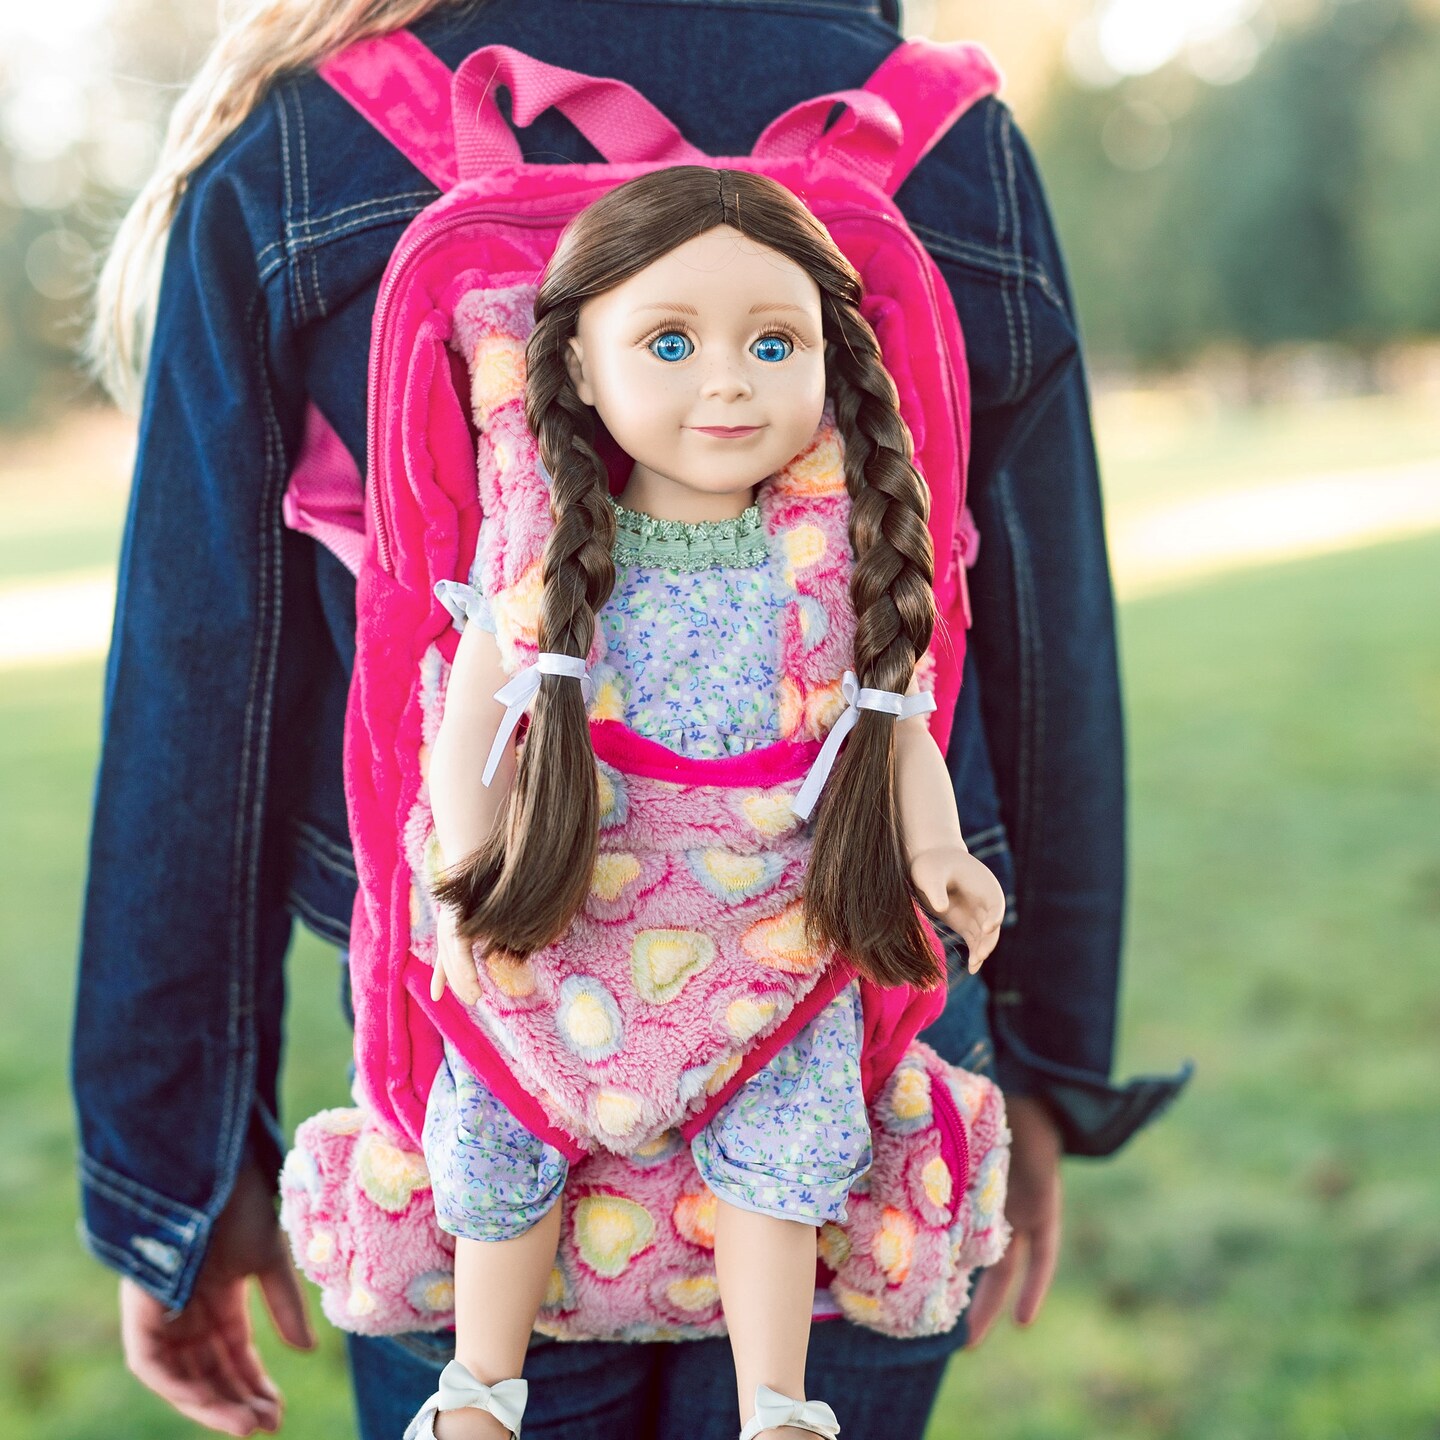 Michaels　Treasures　Hearts　The　and　Bag,　In　Doll　Queen'　Sleeping　Pink　18　Carrier